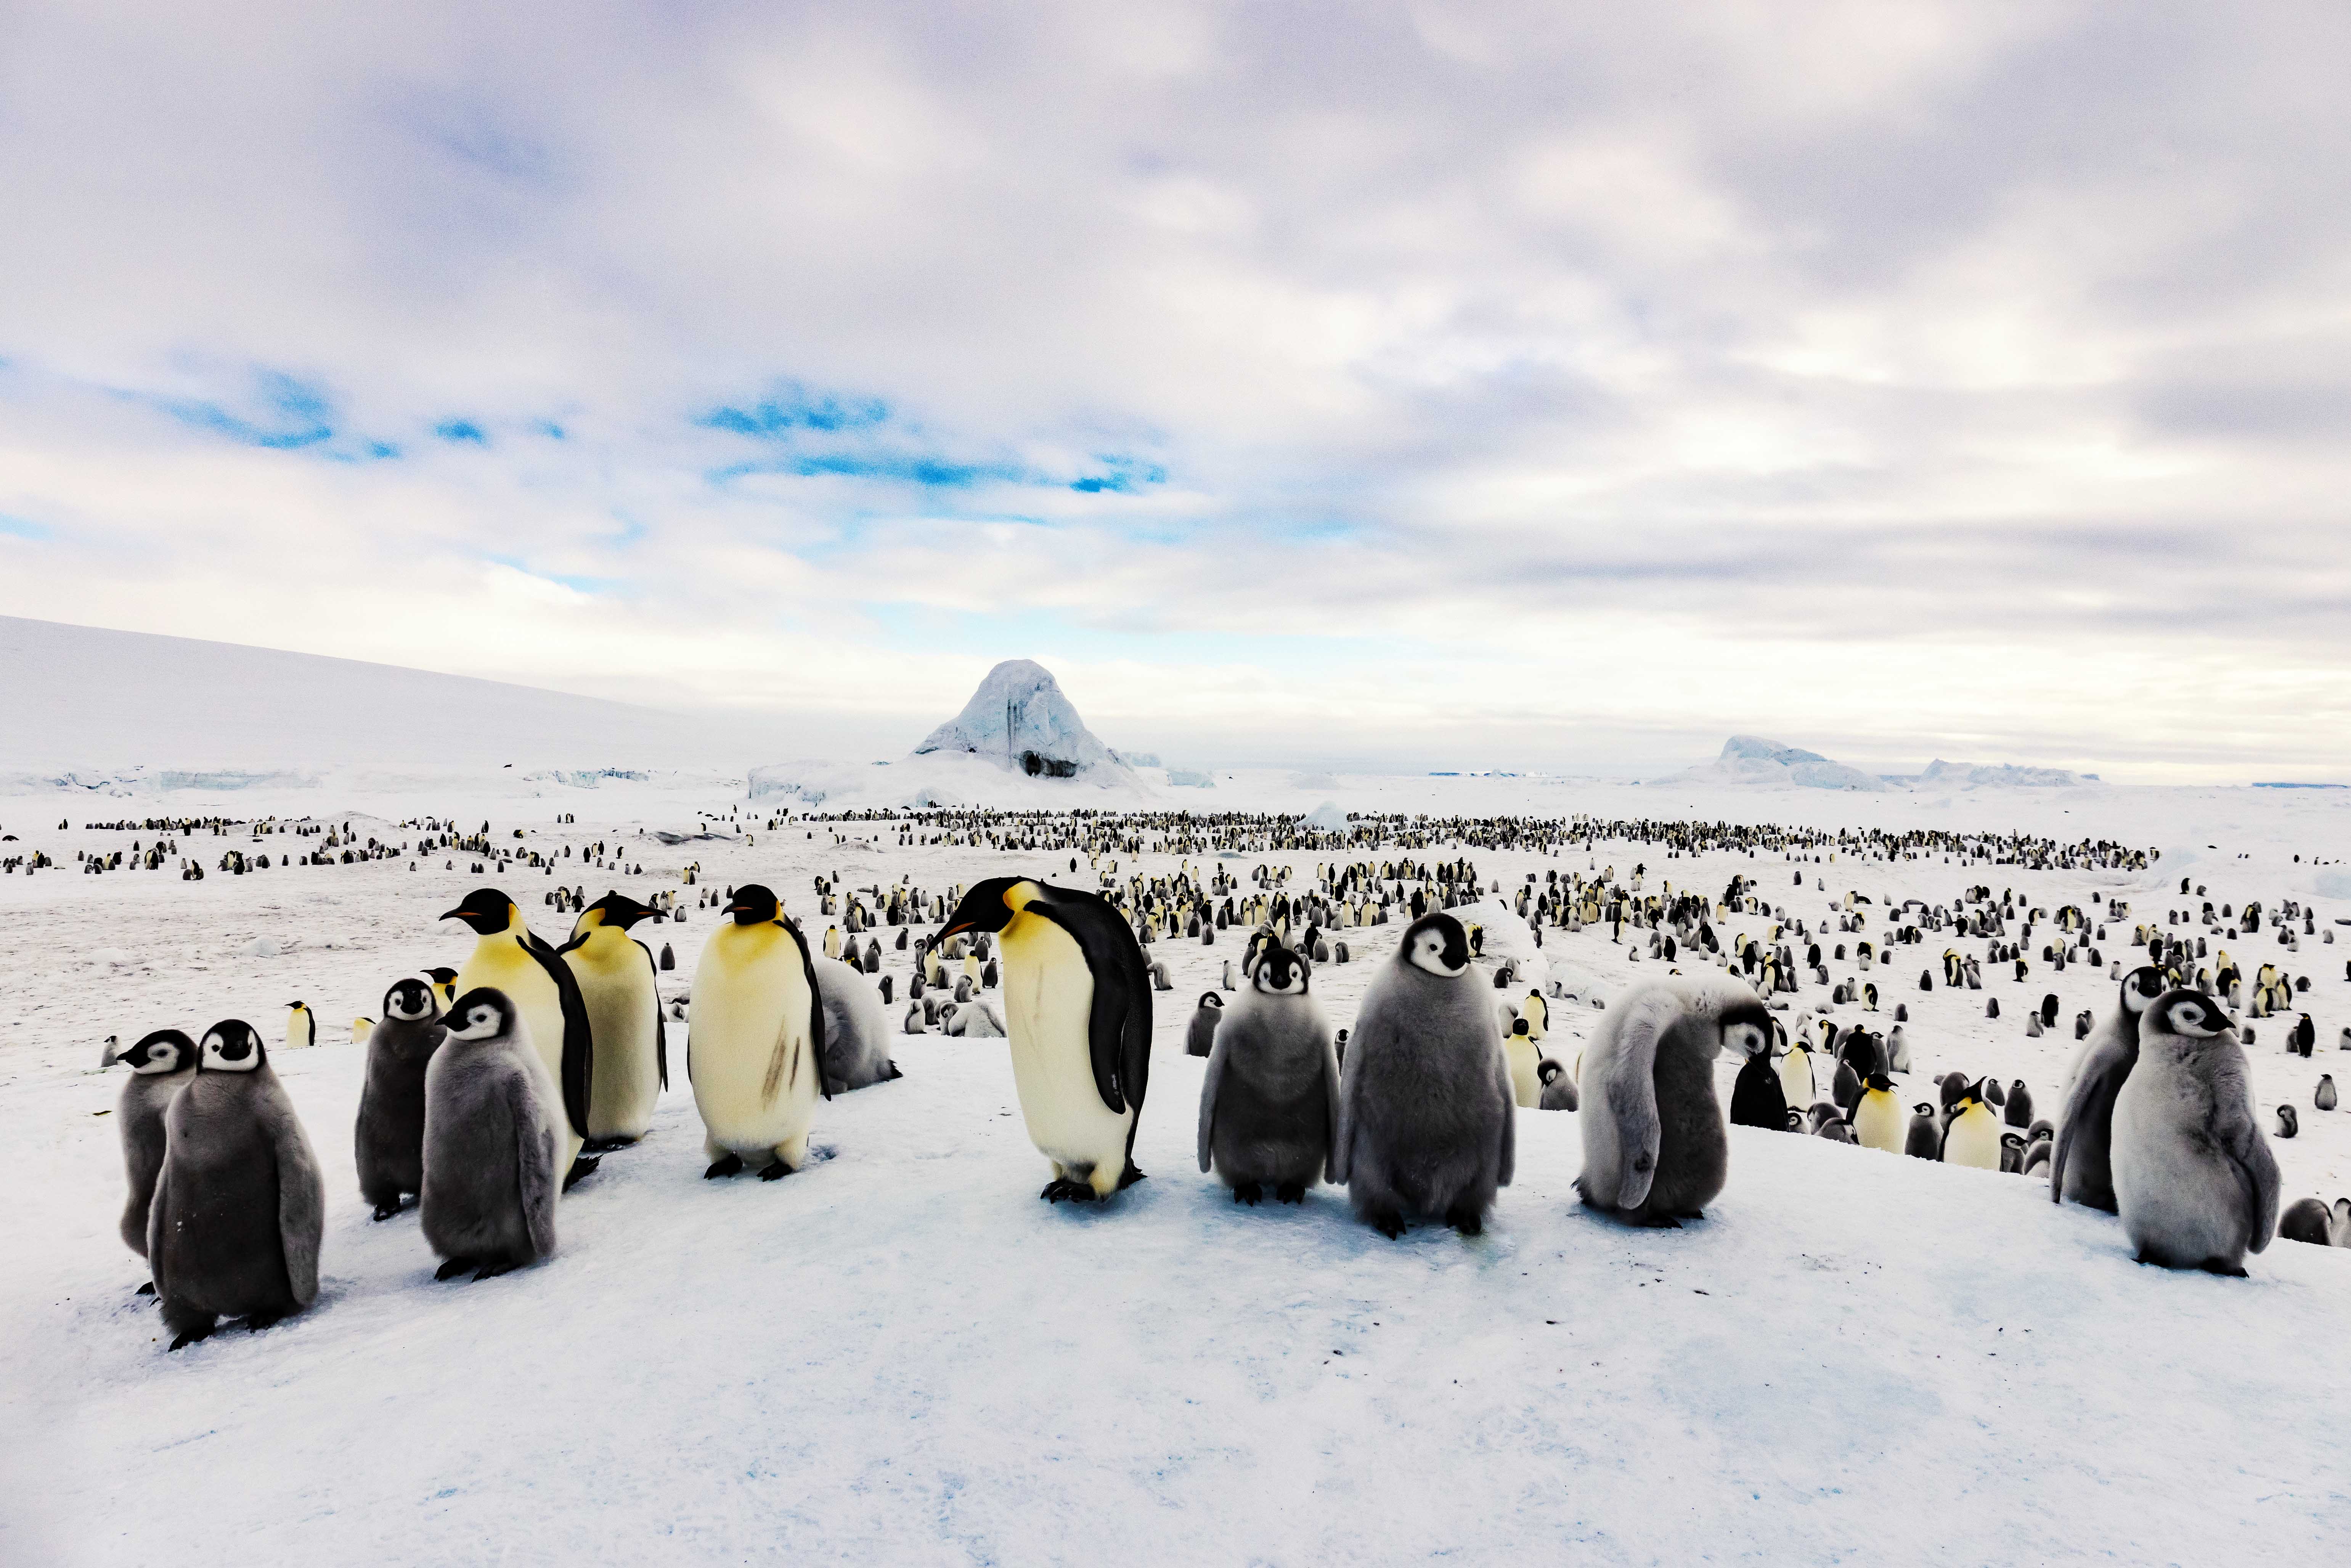 One of the world&apos;s largest colonies of Emperor penguins thrives at Snow Hill Island in the remote Weddell Sea of Antarctica.